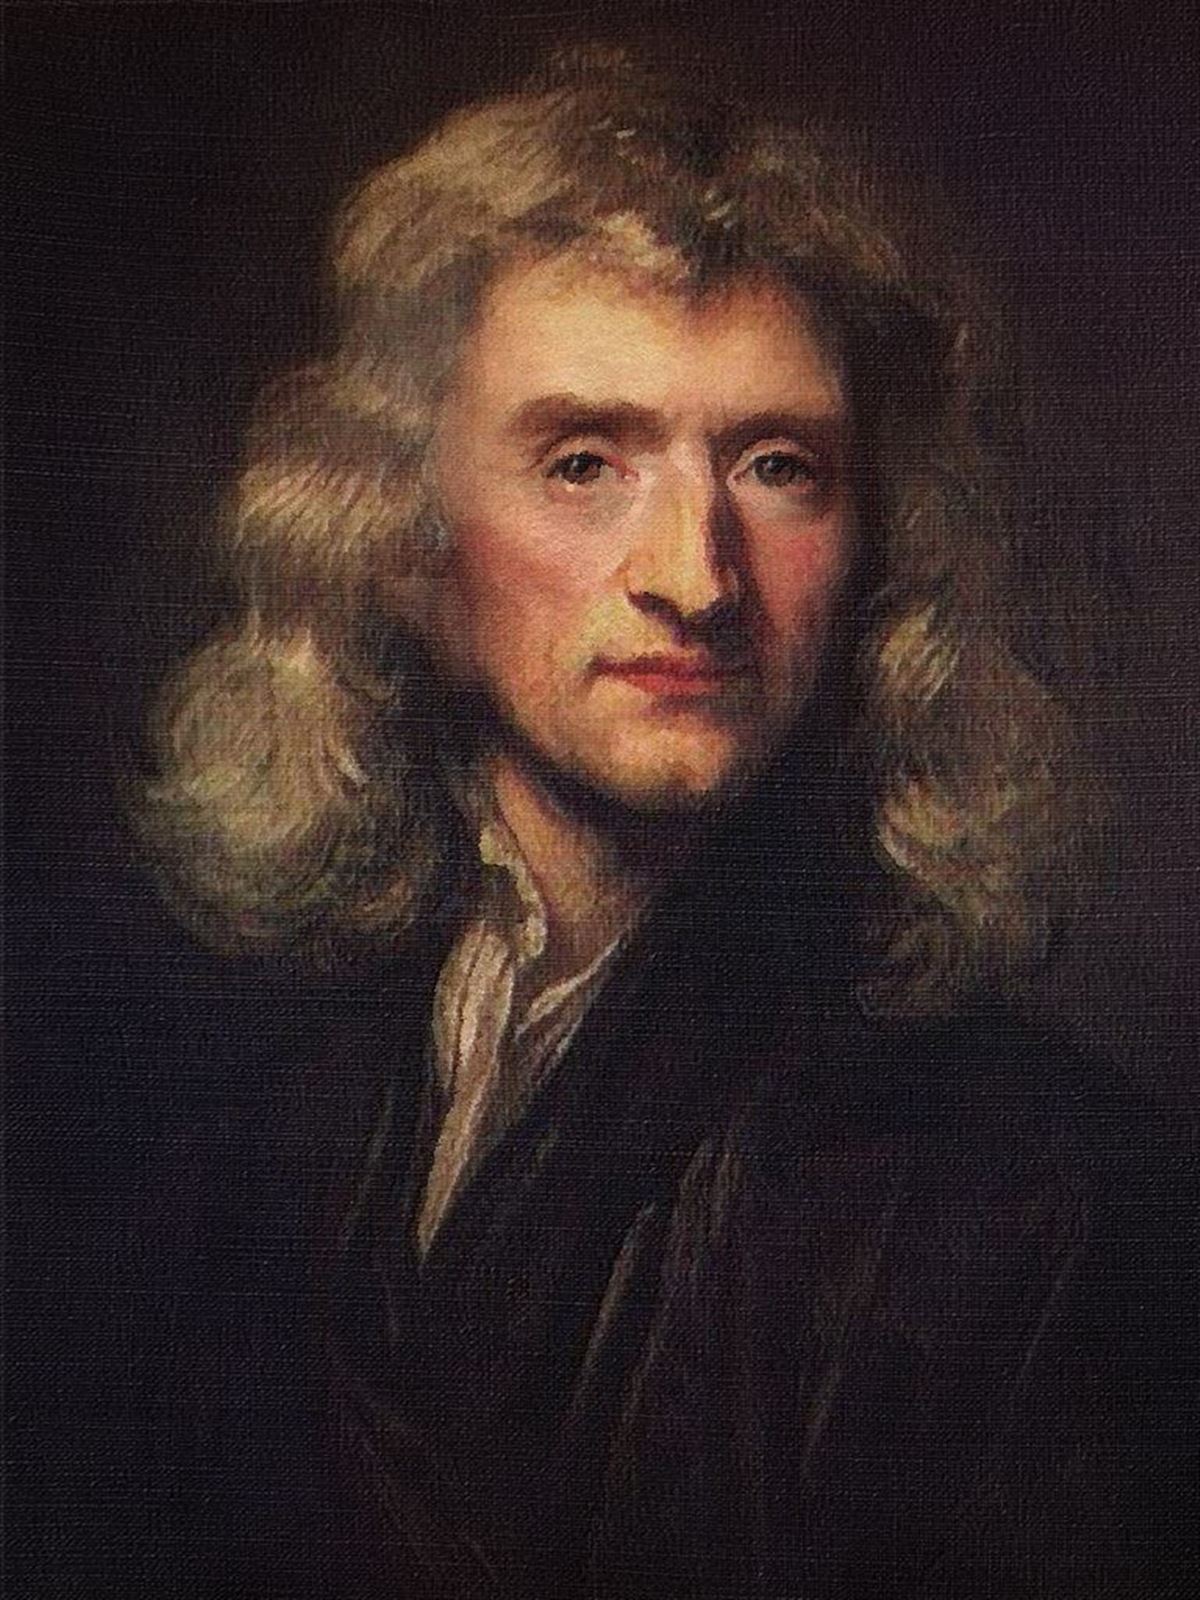 isaac newton famous for